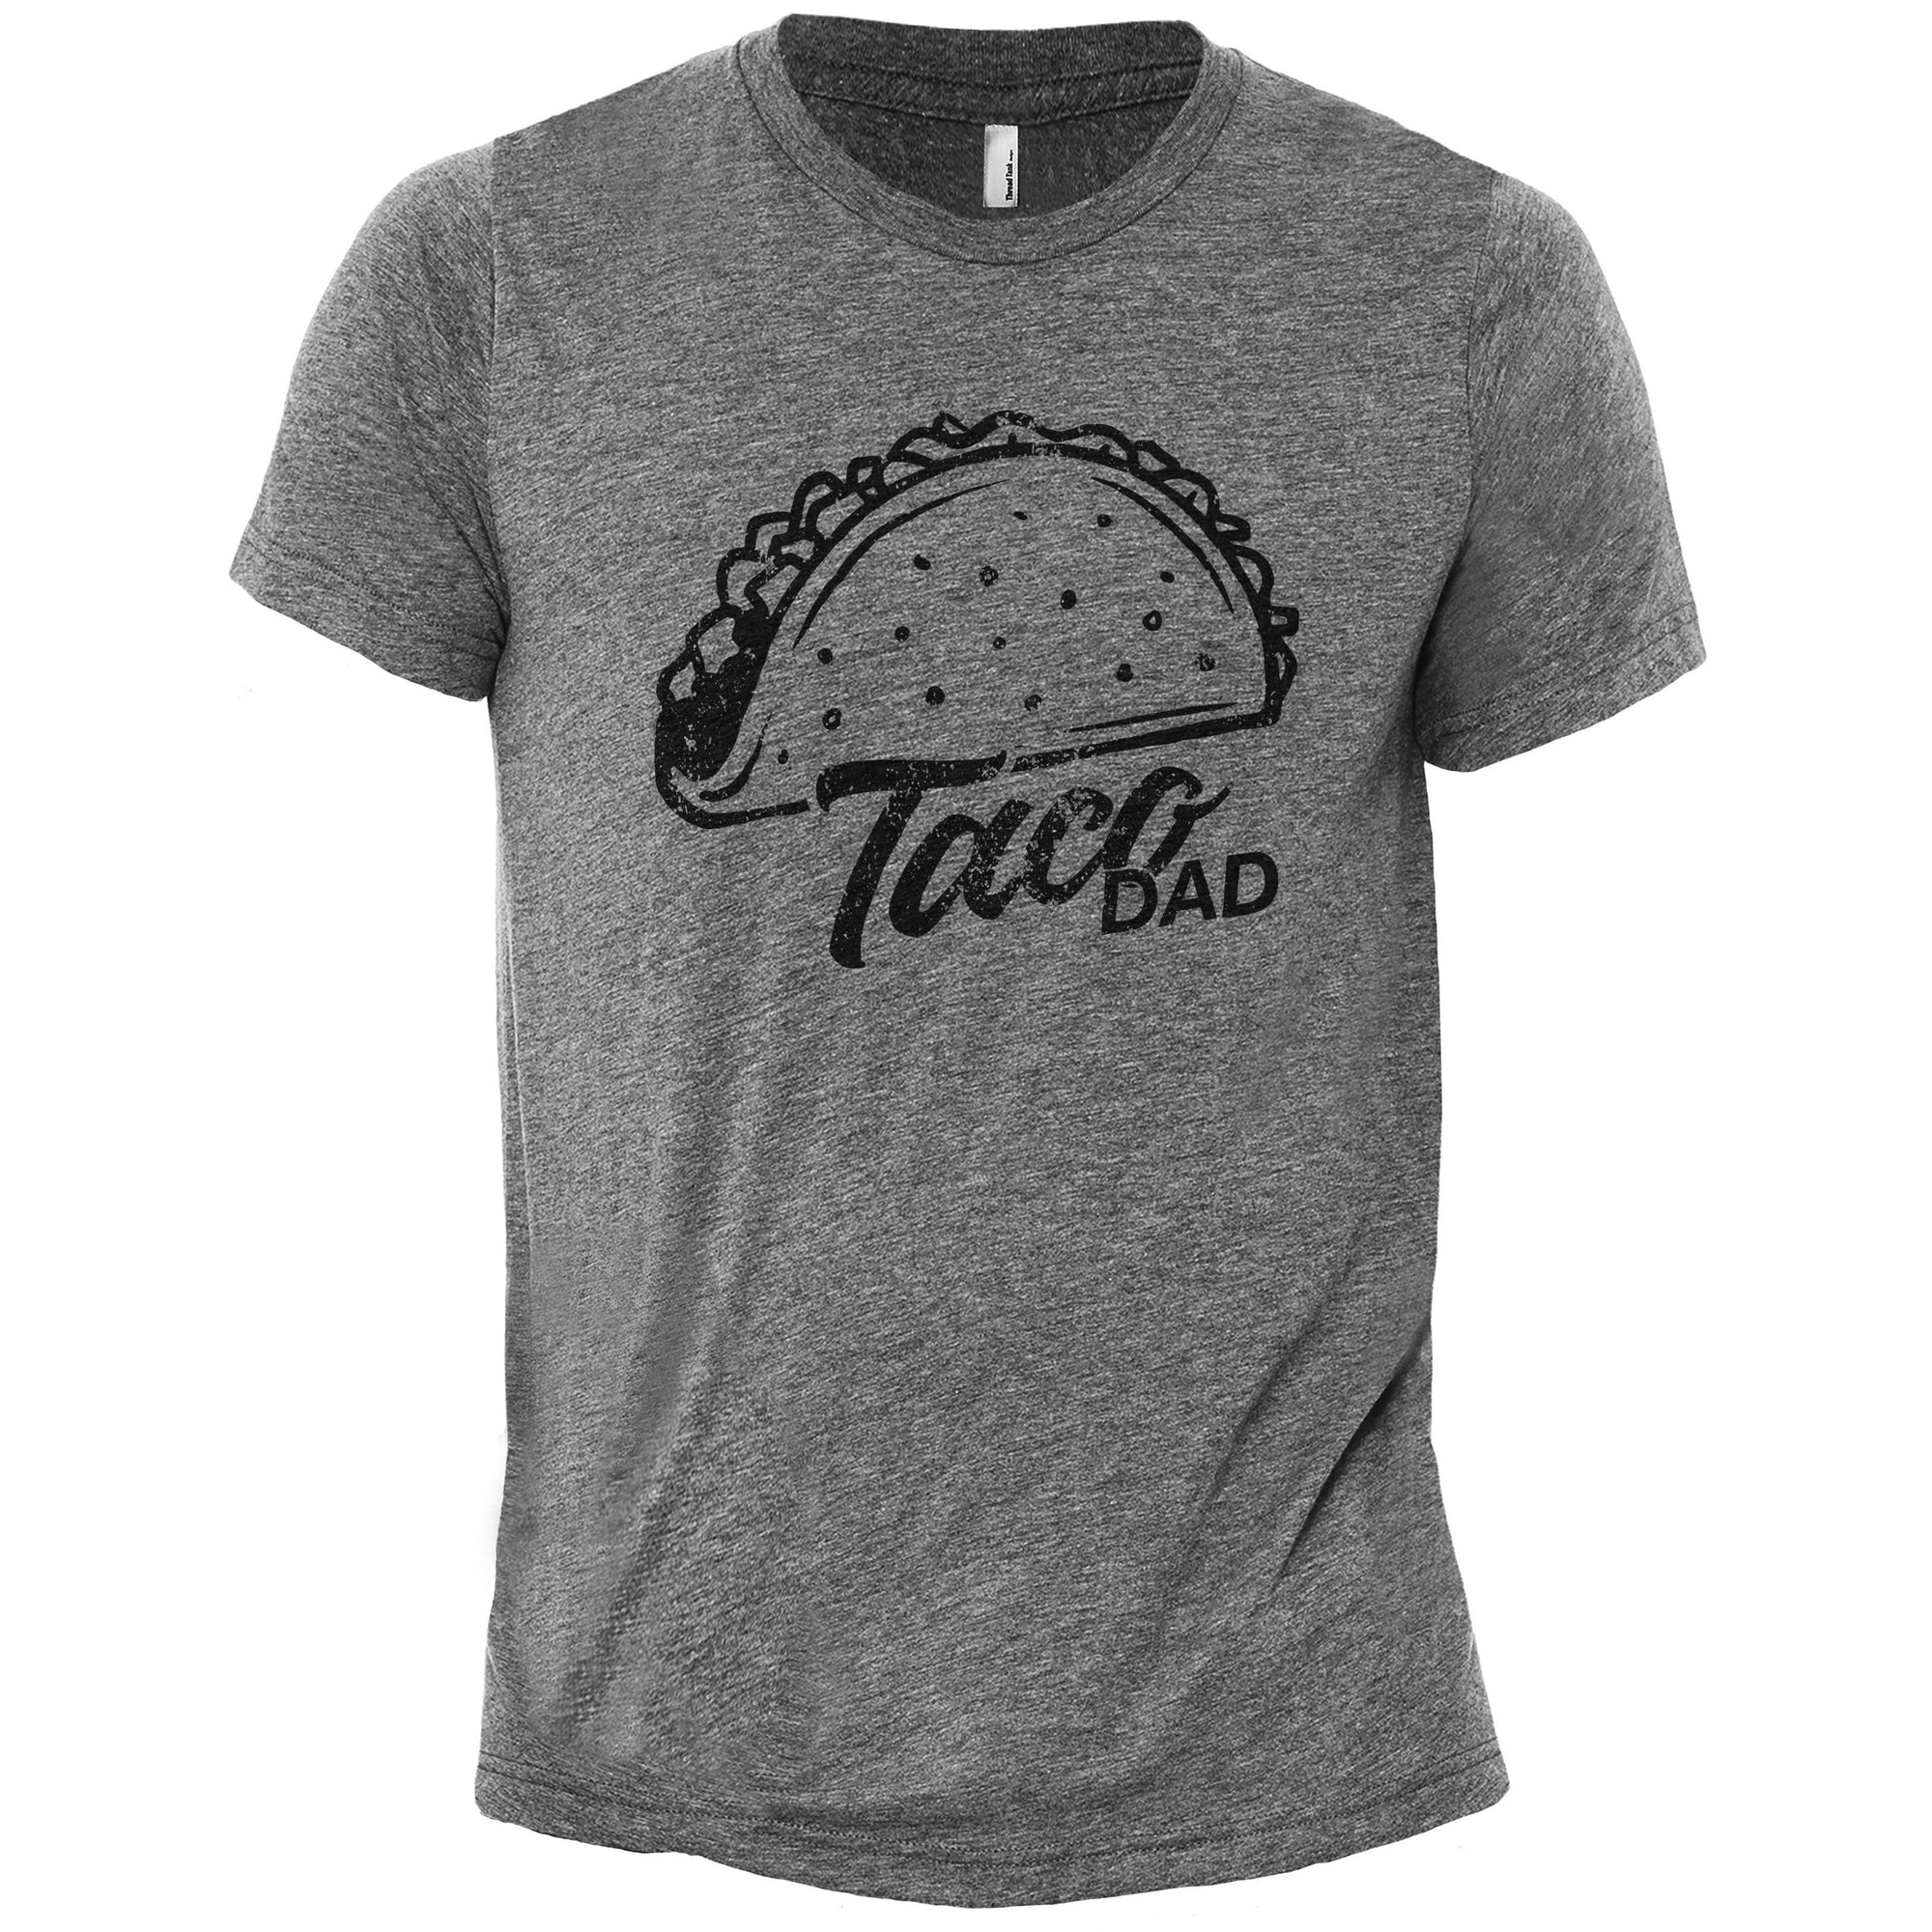 Taco Dad - thread tank | Stories you can wear.